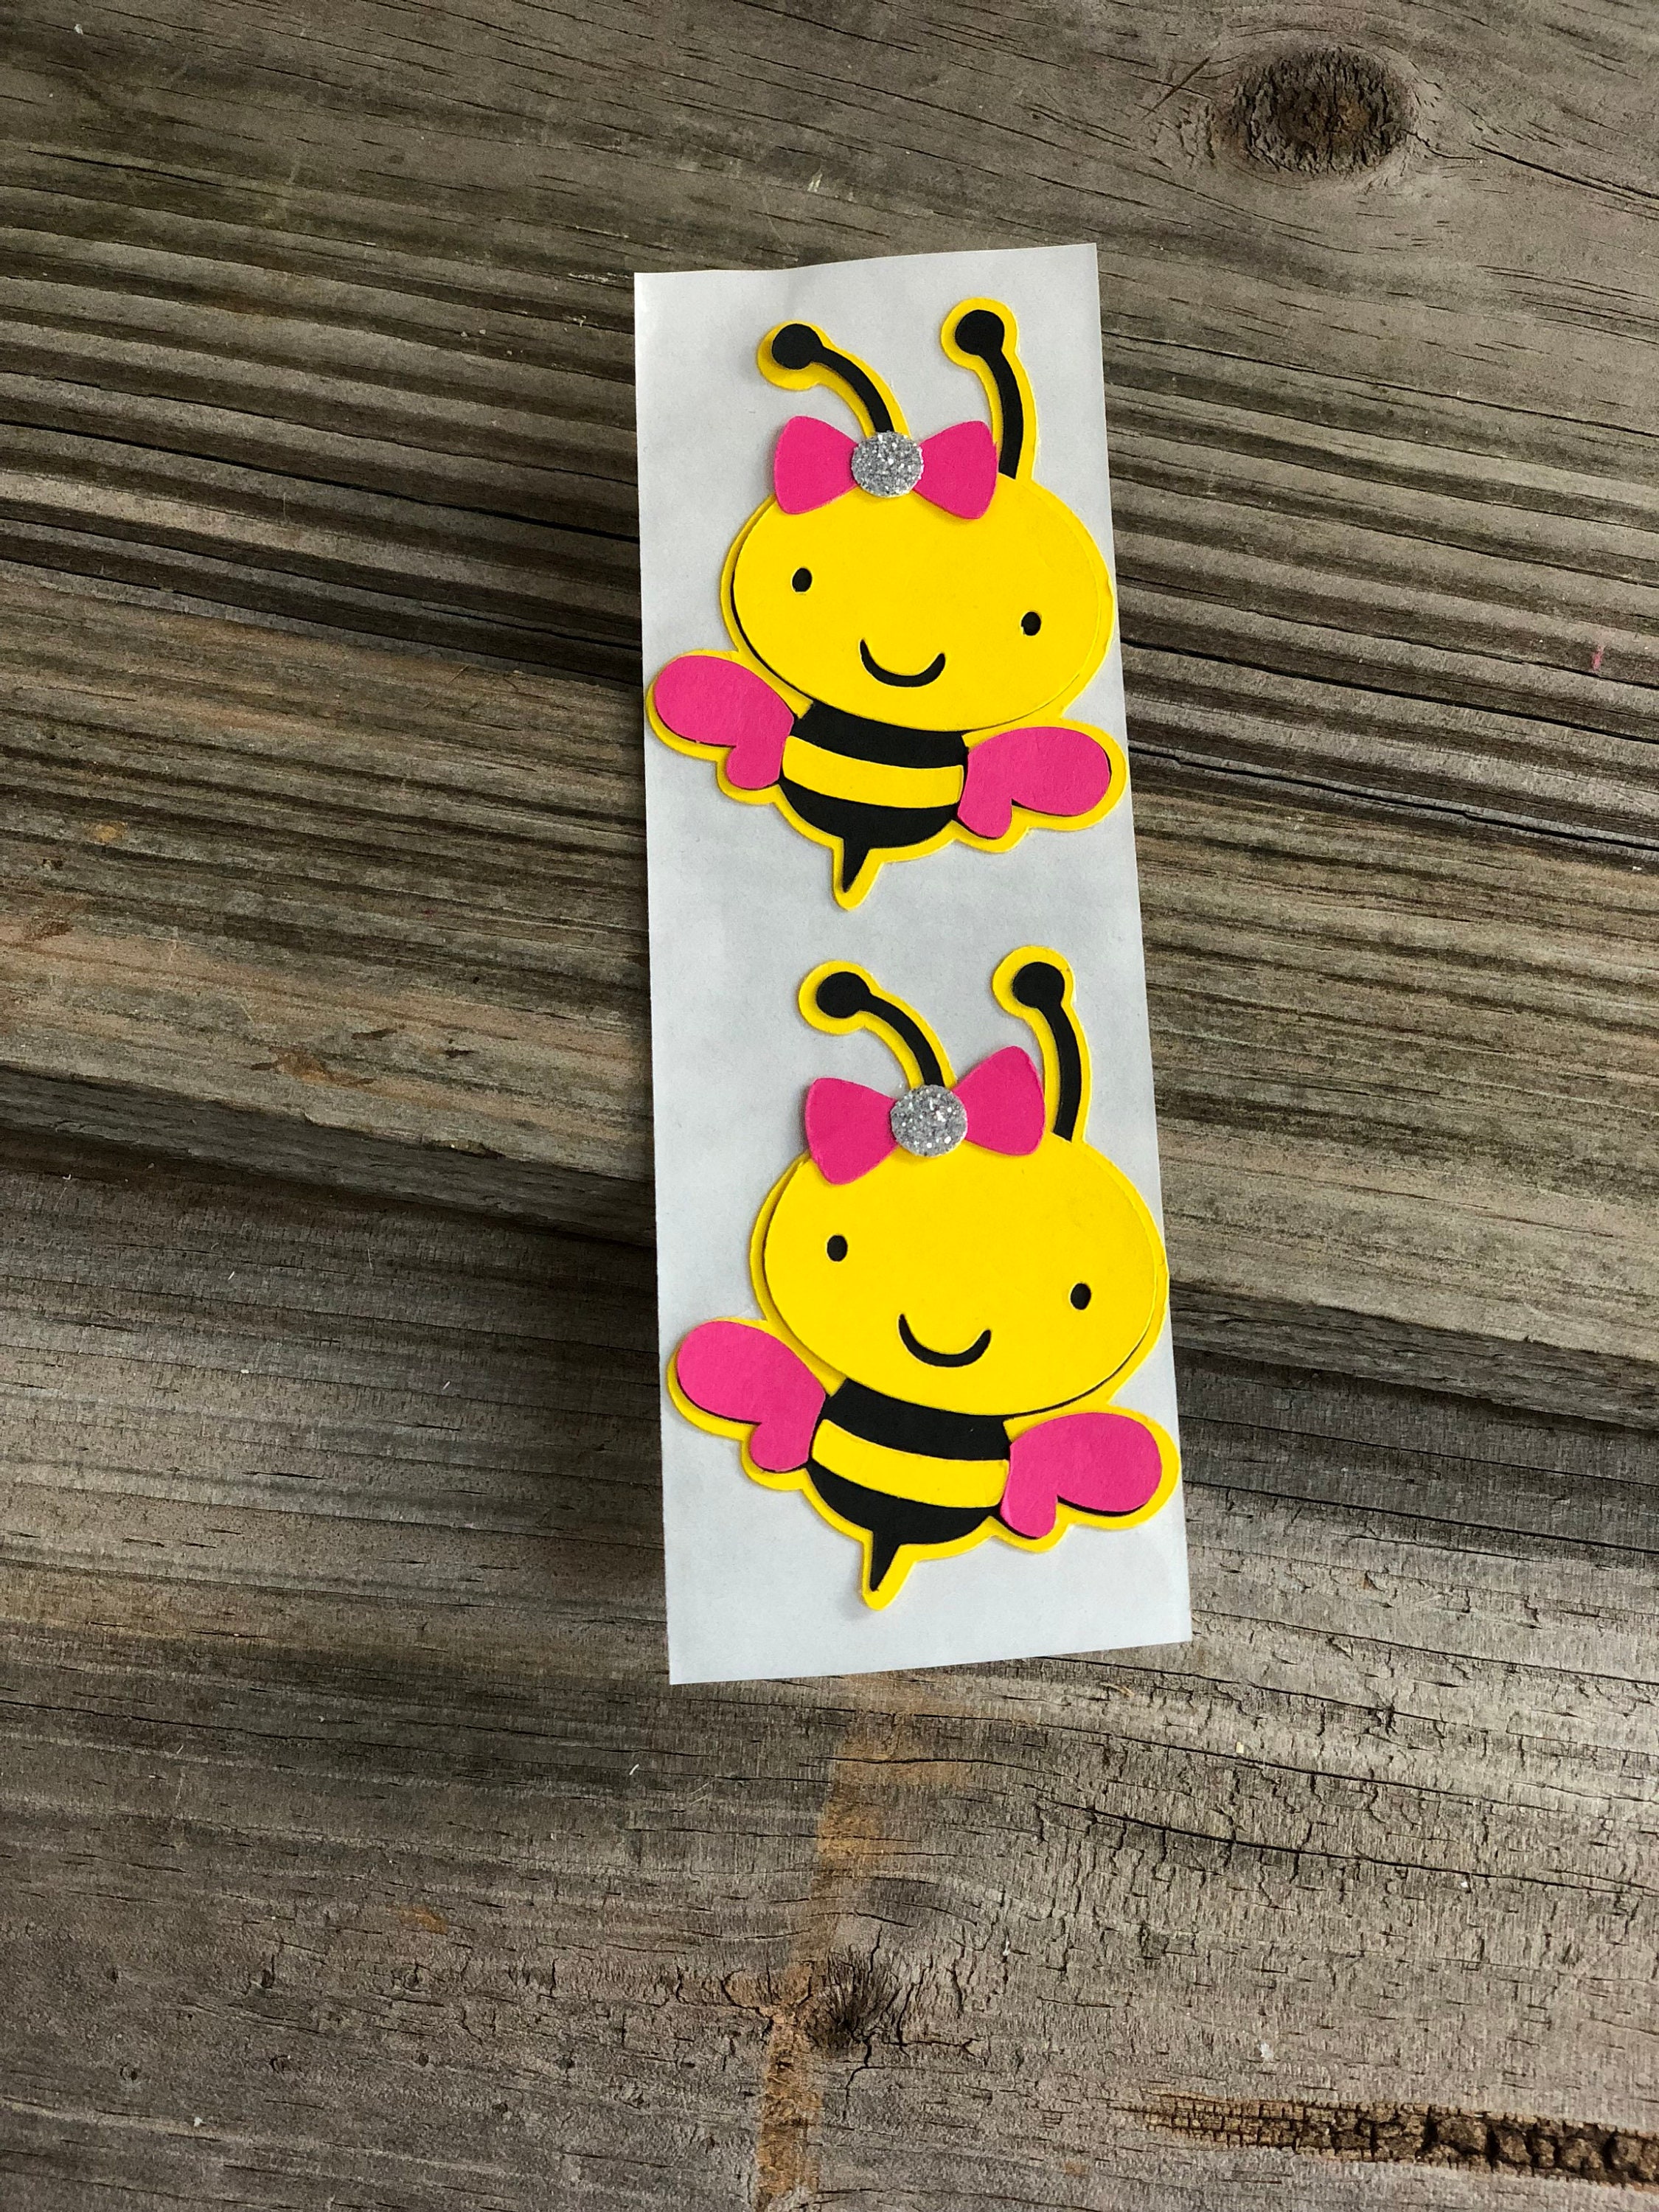 Set of 12 - Yellow, Black & Fuchsia BUMBLE BEE Cupcake Toppers - Baby  Shower/Birthday Party - Decorations/Favors/Centerpiece - Girl Bee